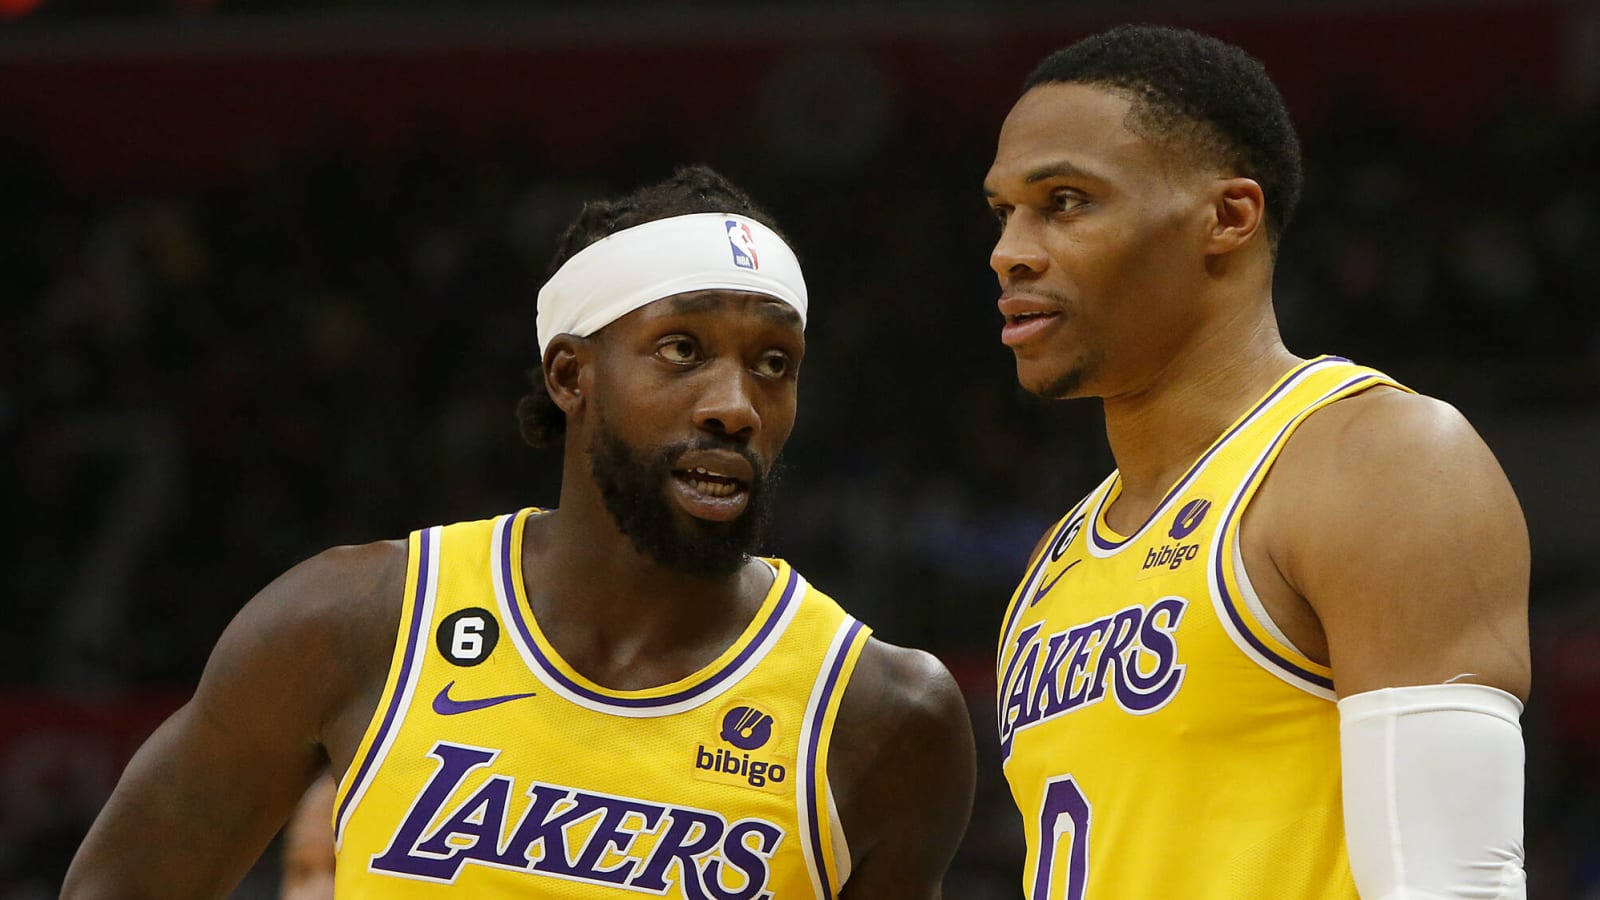 Patrick Beverley, Russell Westbrook commiserate after trades from Lakers